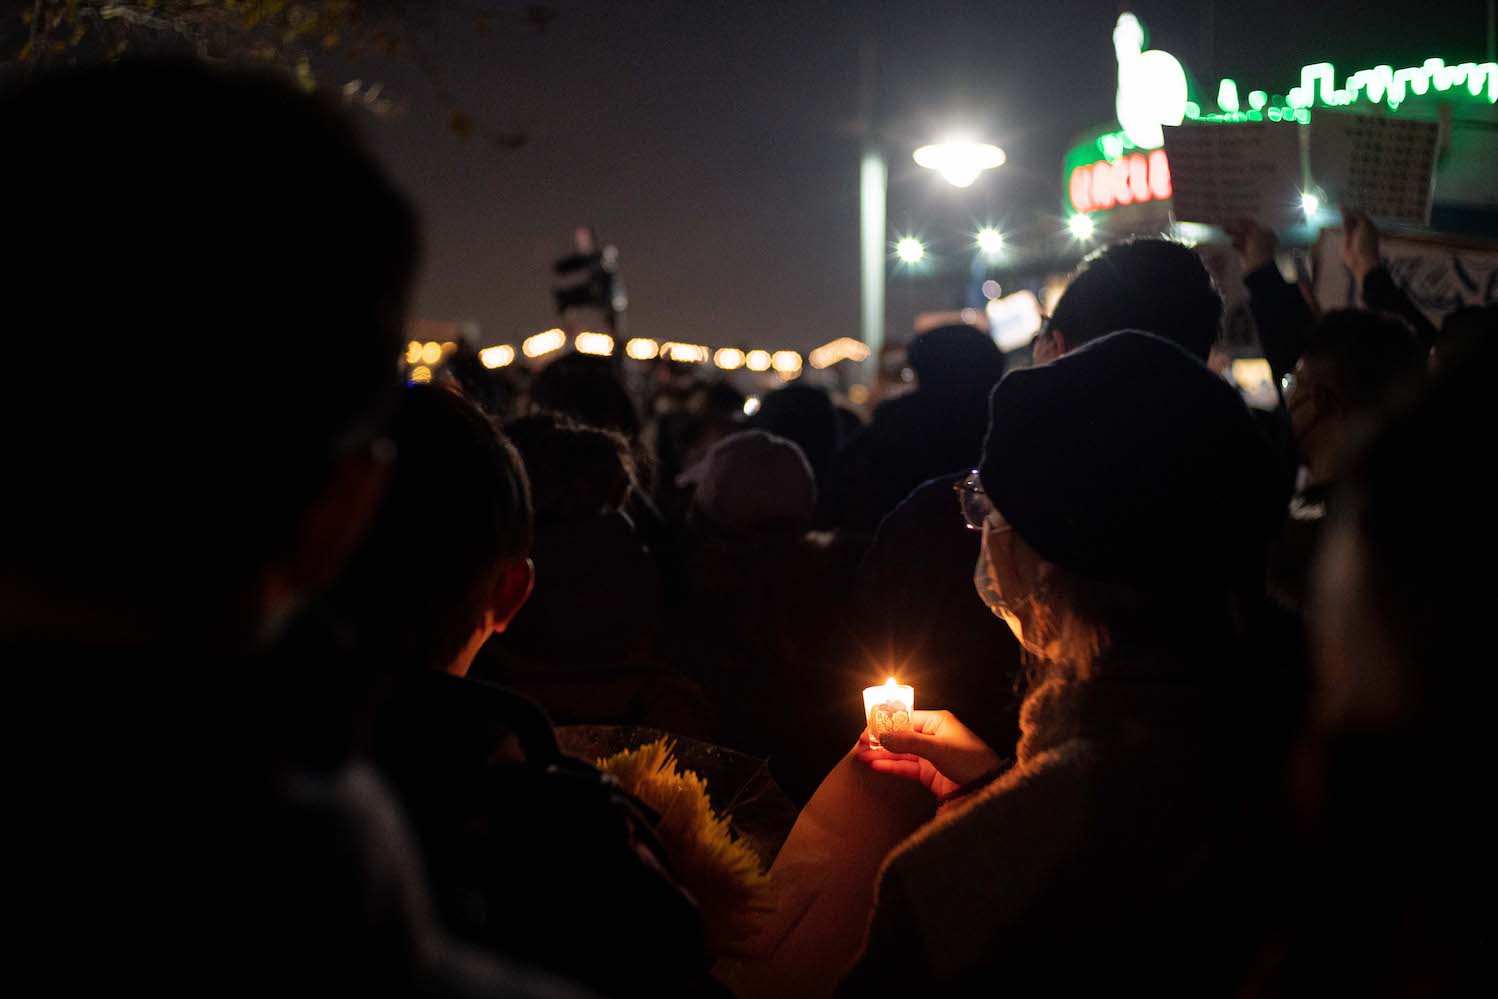 A couple holds a candle between their hands while participating in the protest in the dark.